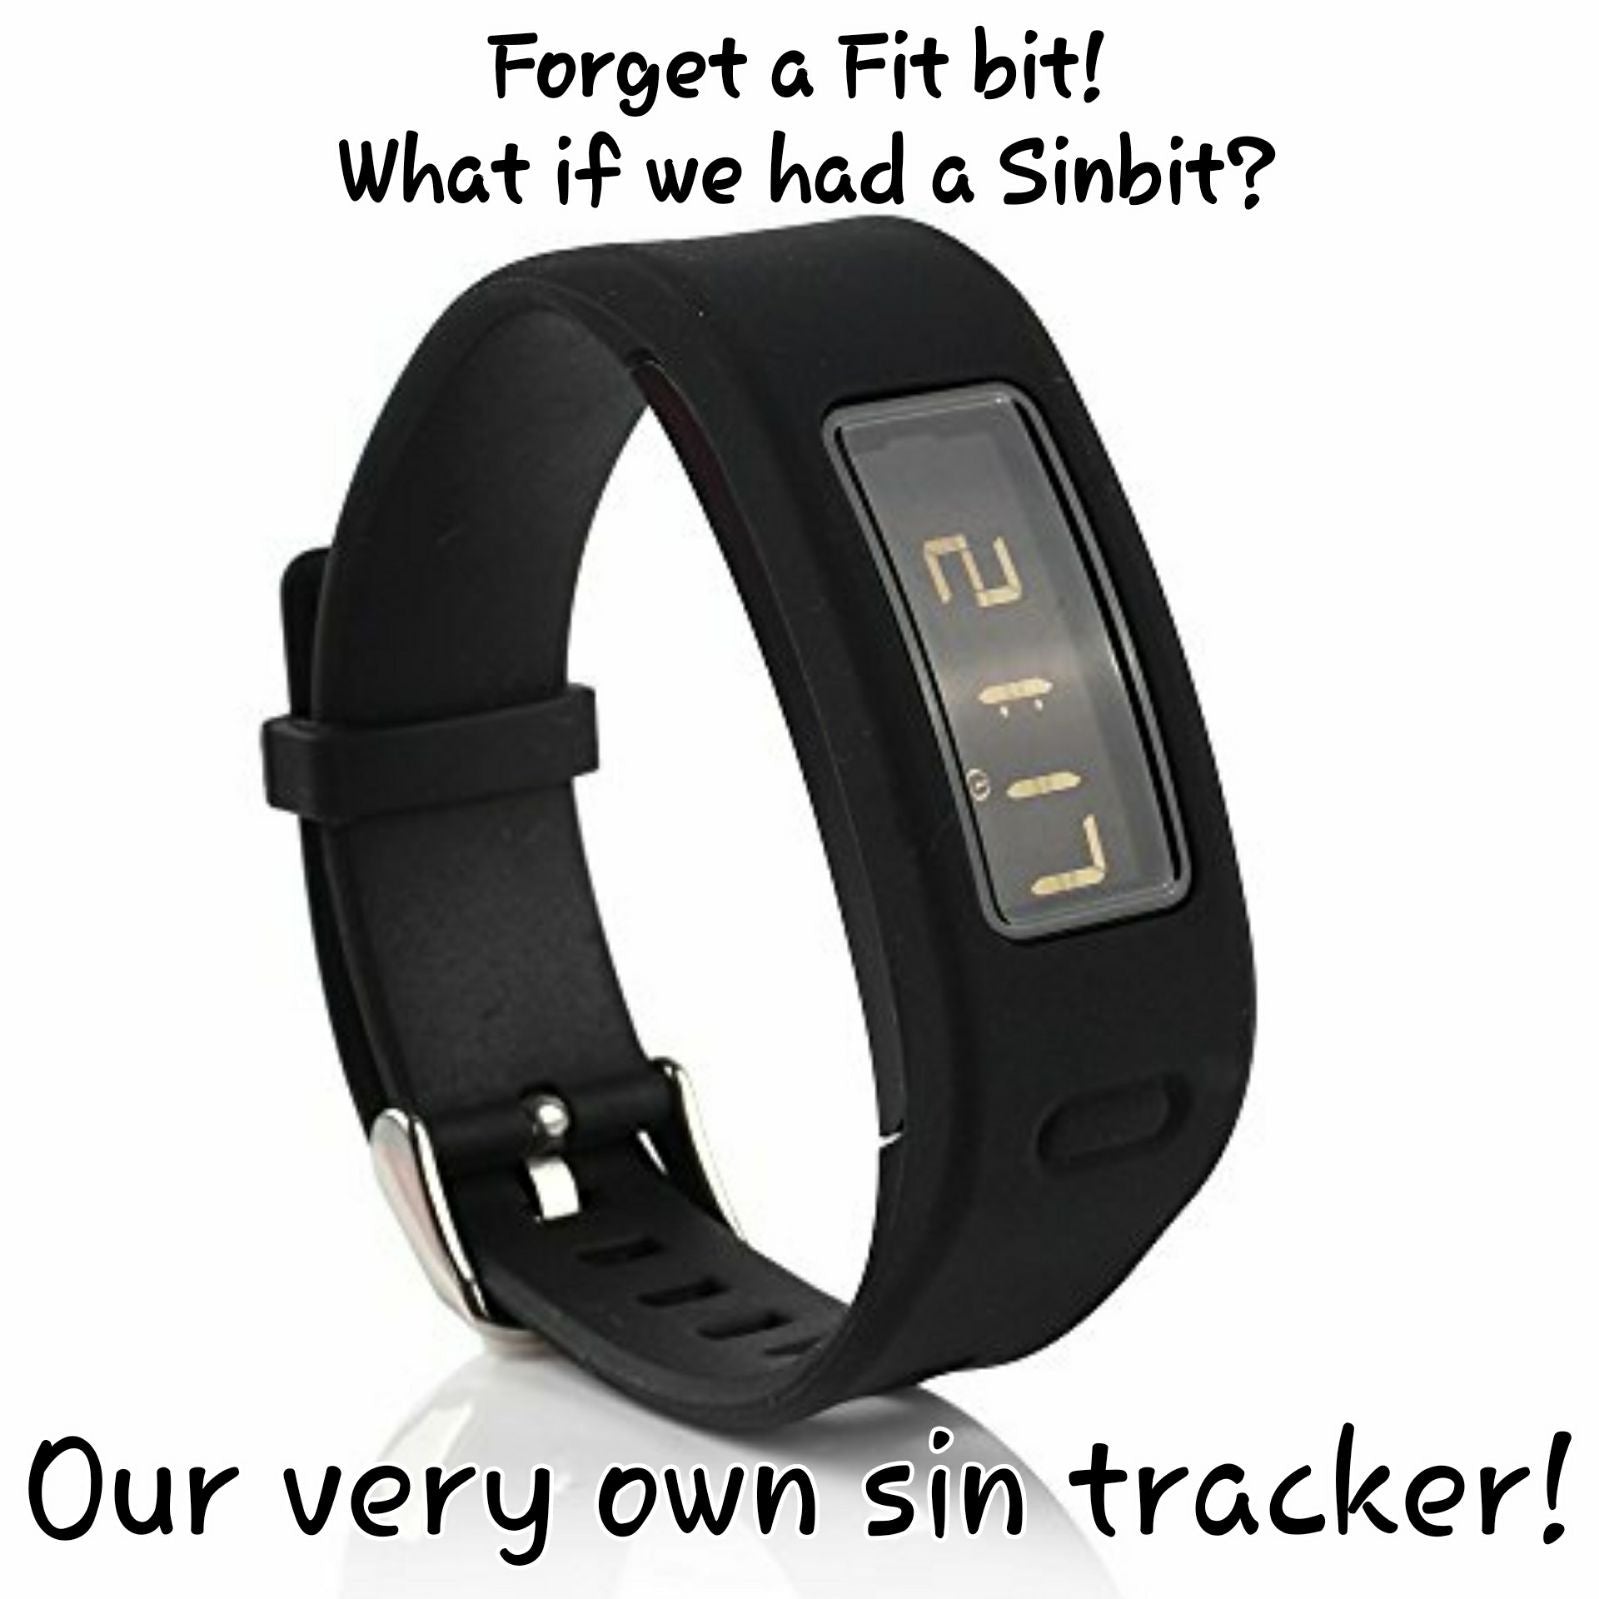 Forget a Fitbit! What if we had a Sinbit?